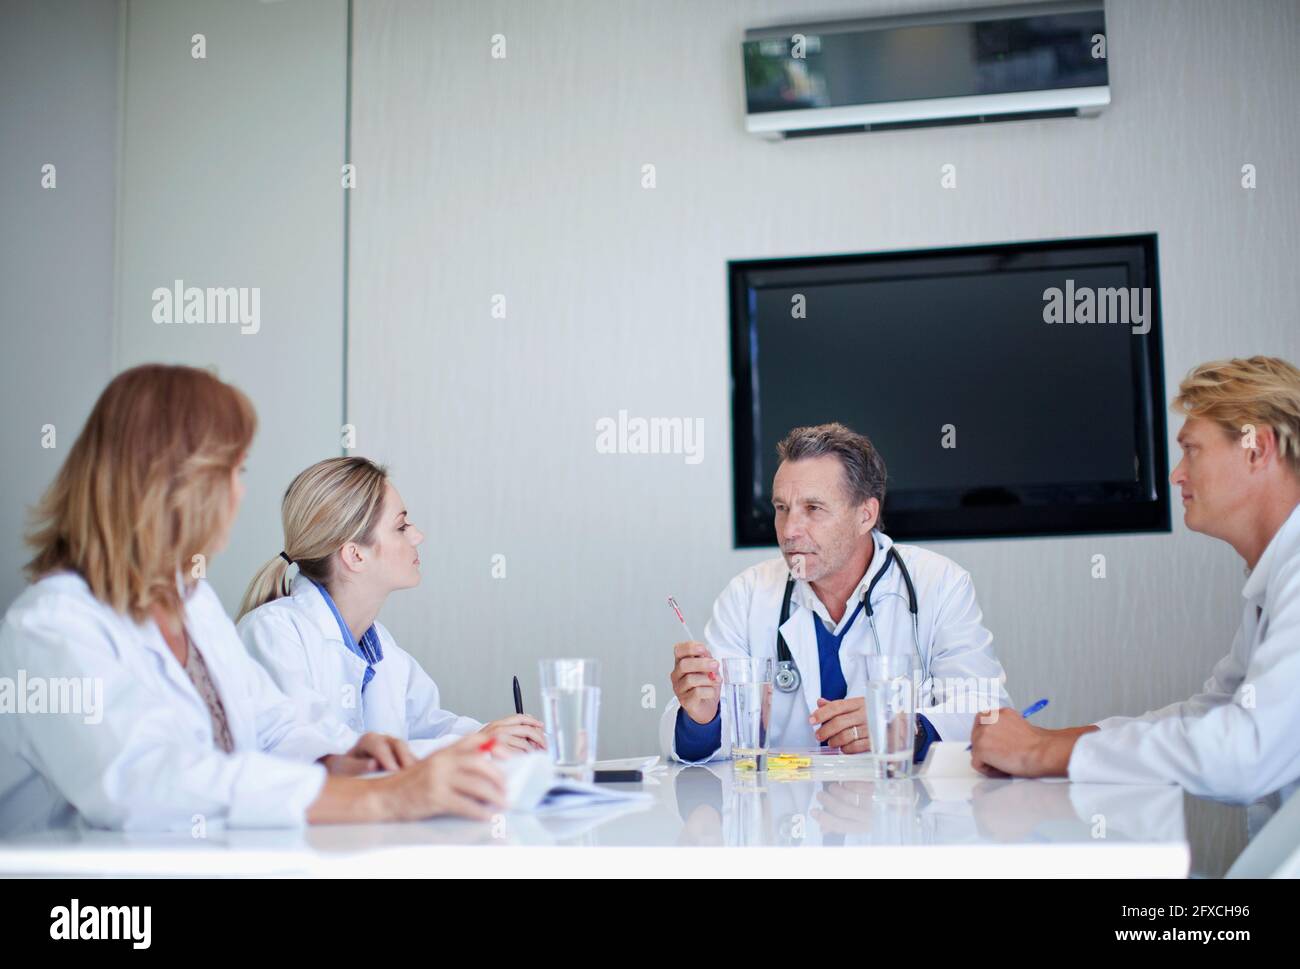 Senior doctor discussing with male and female healthcare workers during meeting in hospital Stock Photo